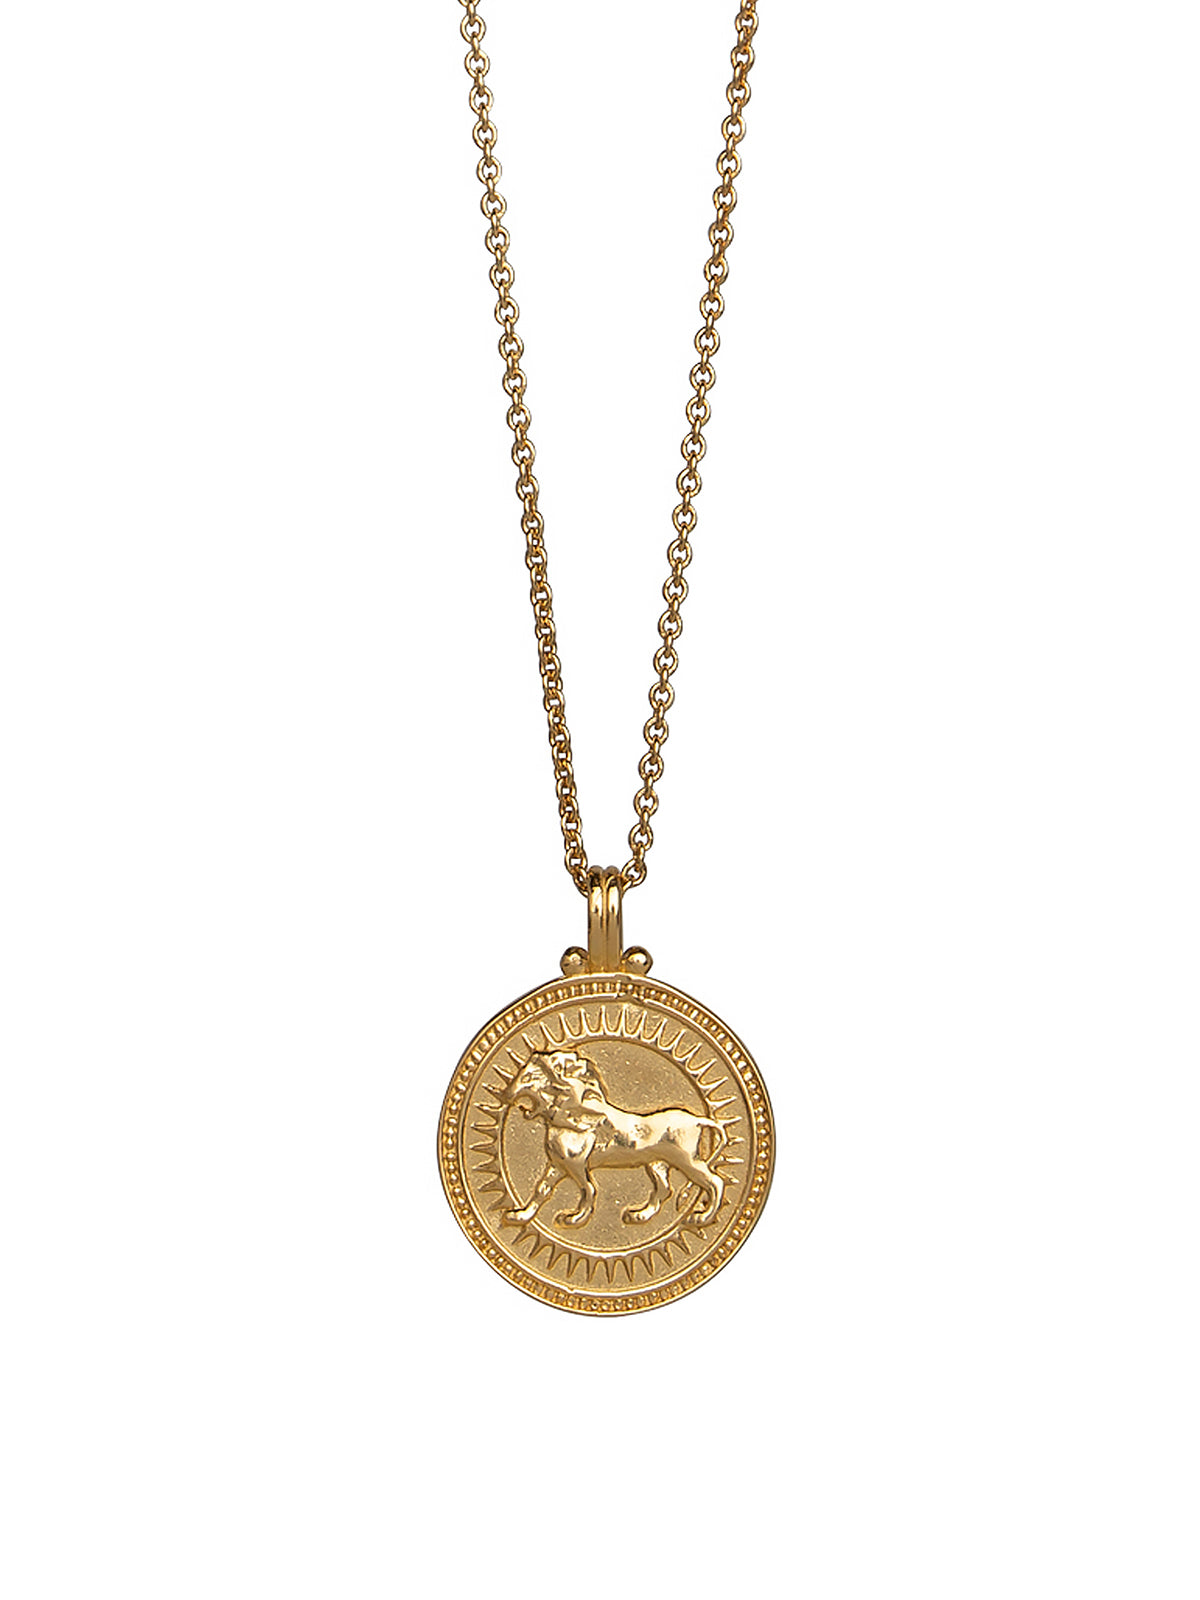 Leo. 18ct Solid Gold Star Sign Necklace. The pendant features an Evil Eye on the back to ward off any naughty behavior aimed at you, Our logo and the 750 Hallmark for 18ct Gold.